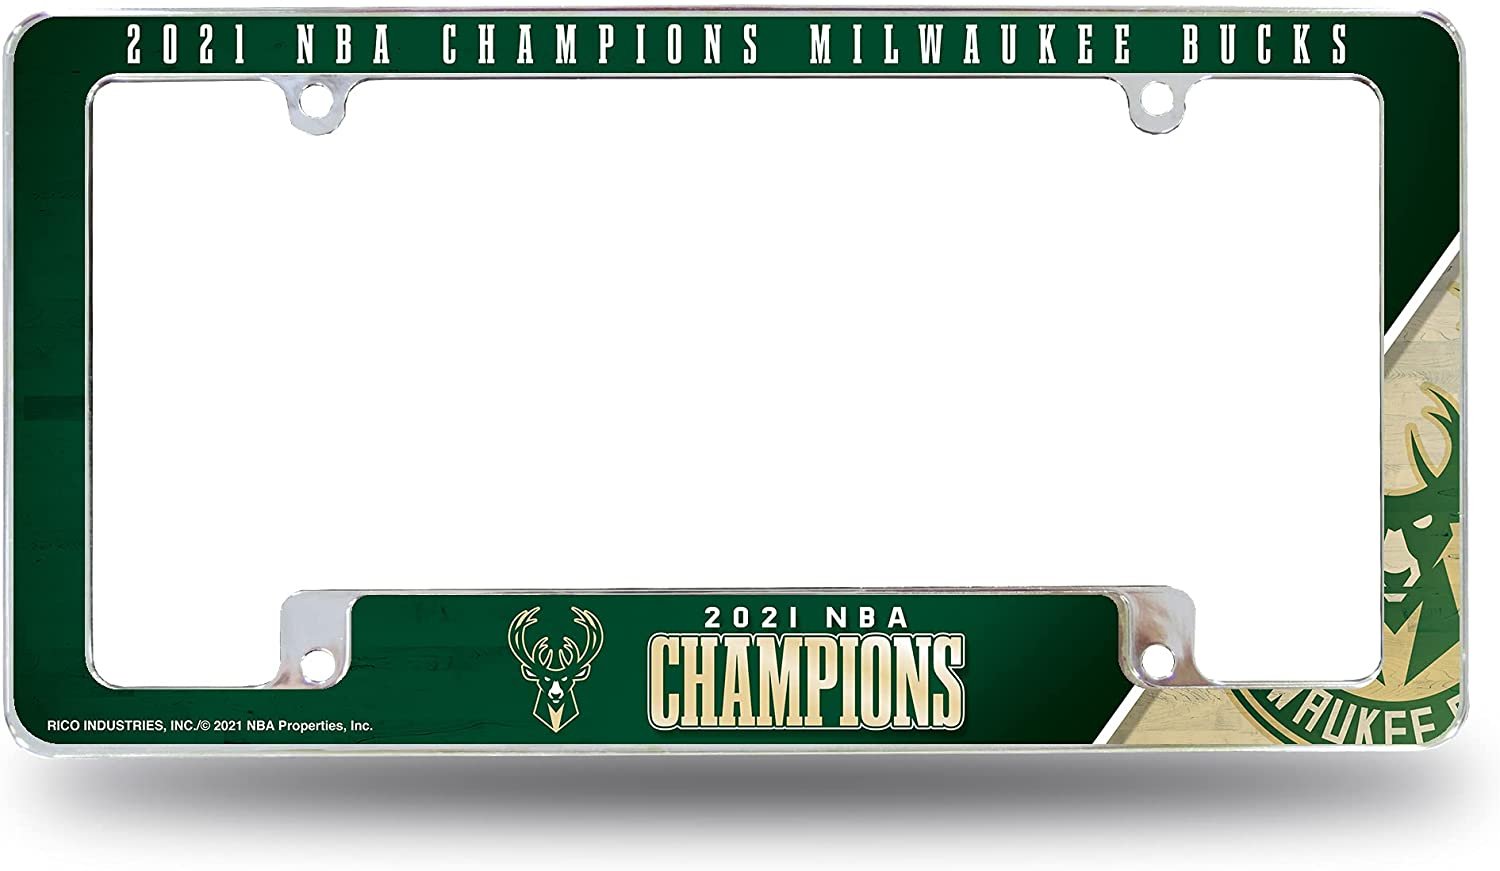 Milwaukee Bucks 2021 Champions Metal License Plate Frame Chrome Tag Cover, All Over Design, 12x6 Inch